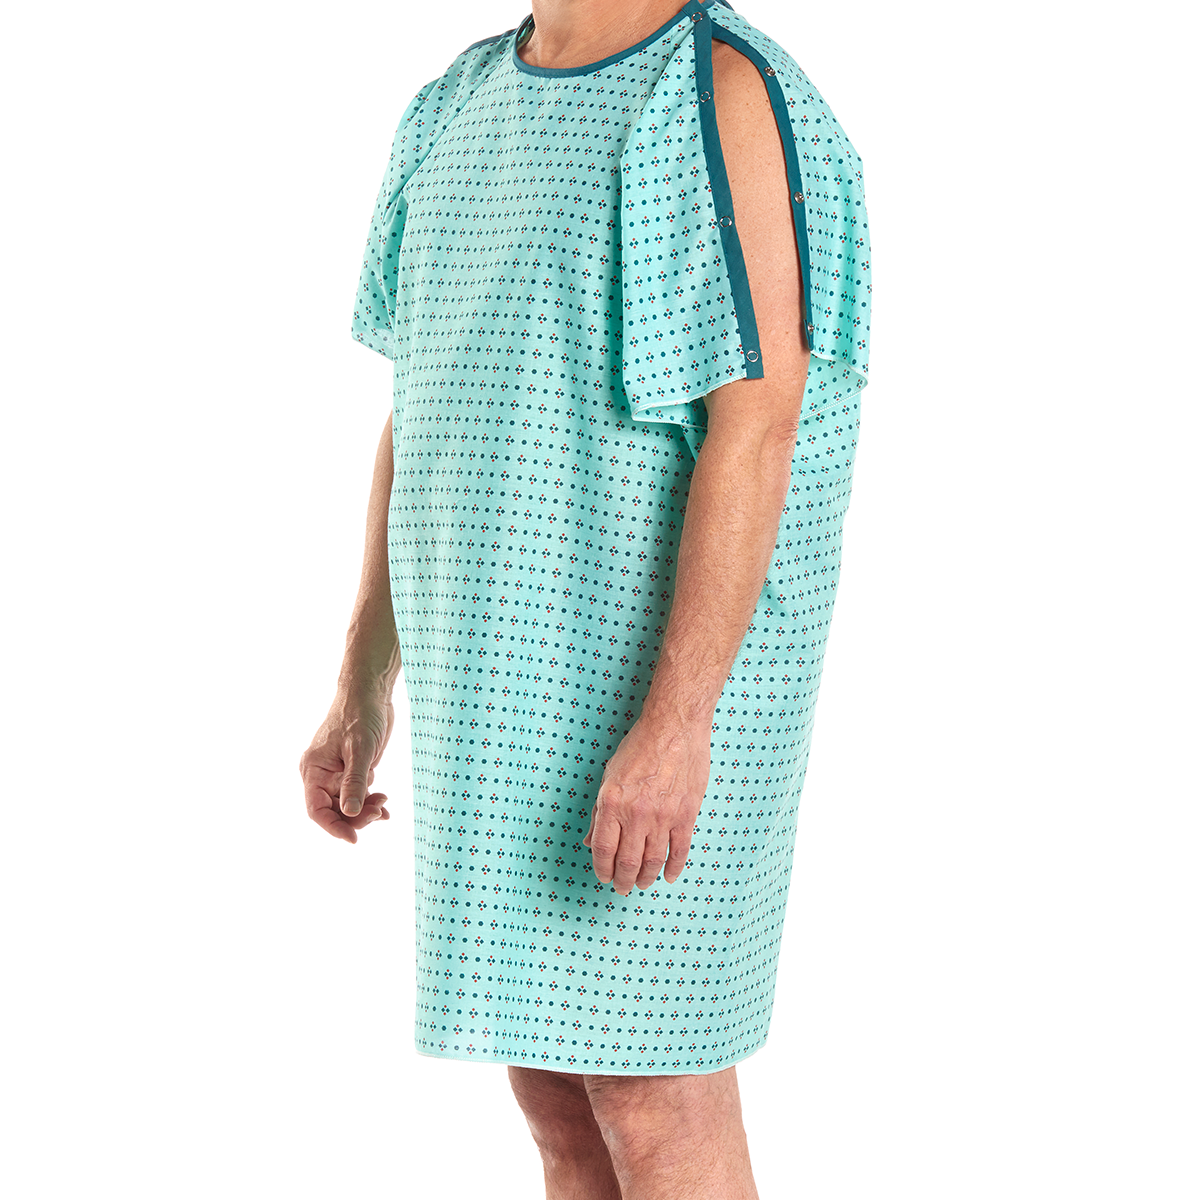 hospital gowns for women